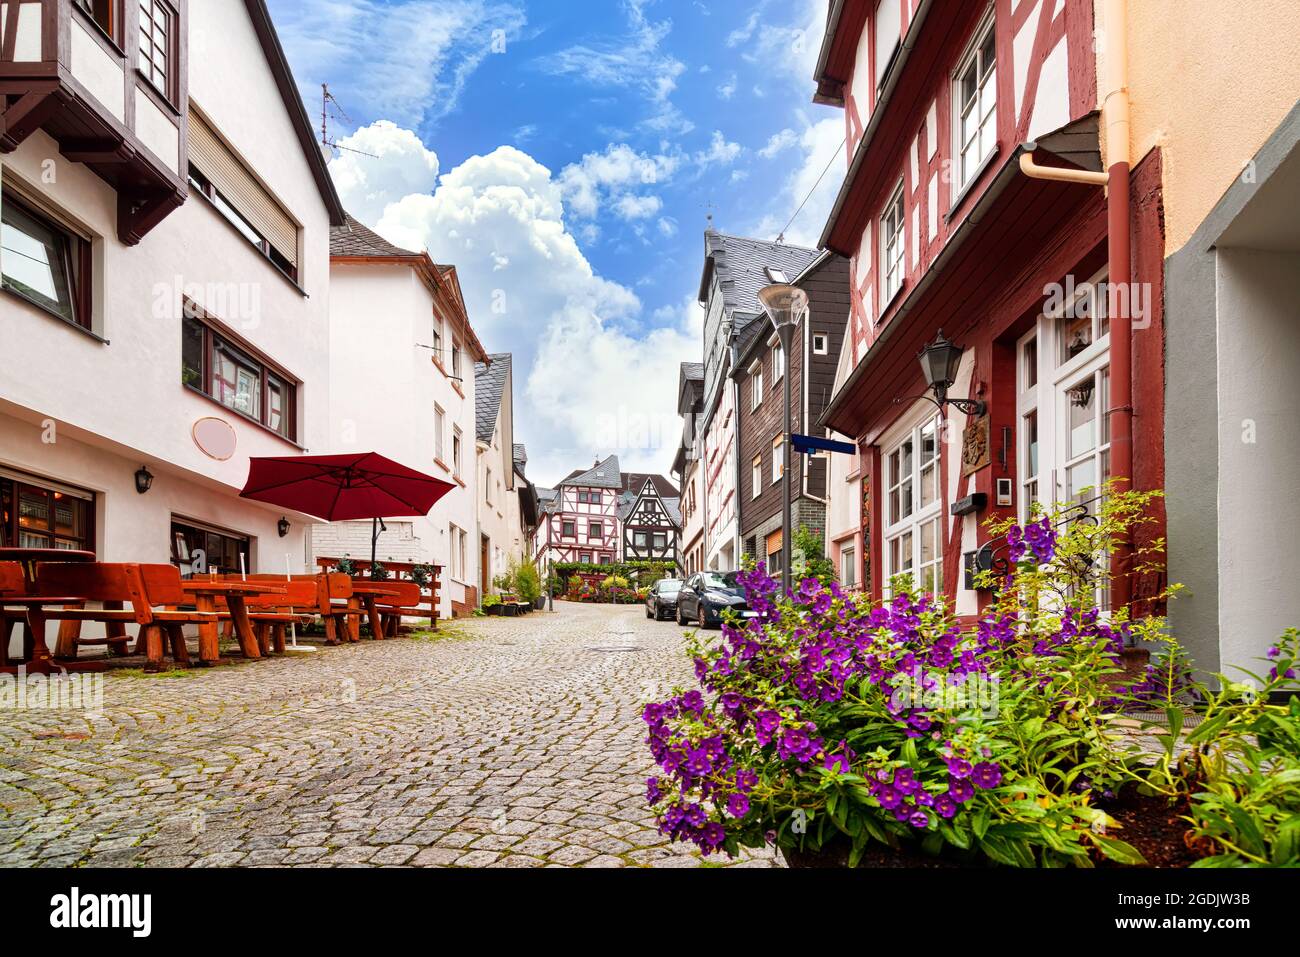 A idyllic, narrow street in the old town of Montabaur, Germany Stock Photo